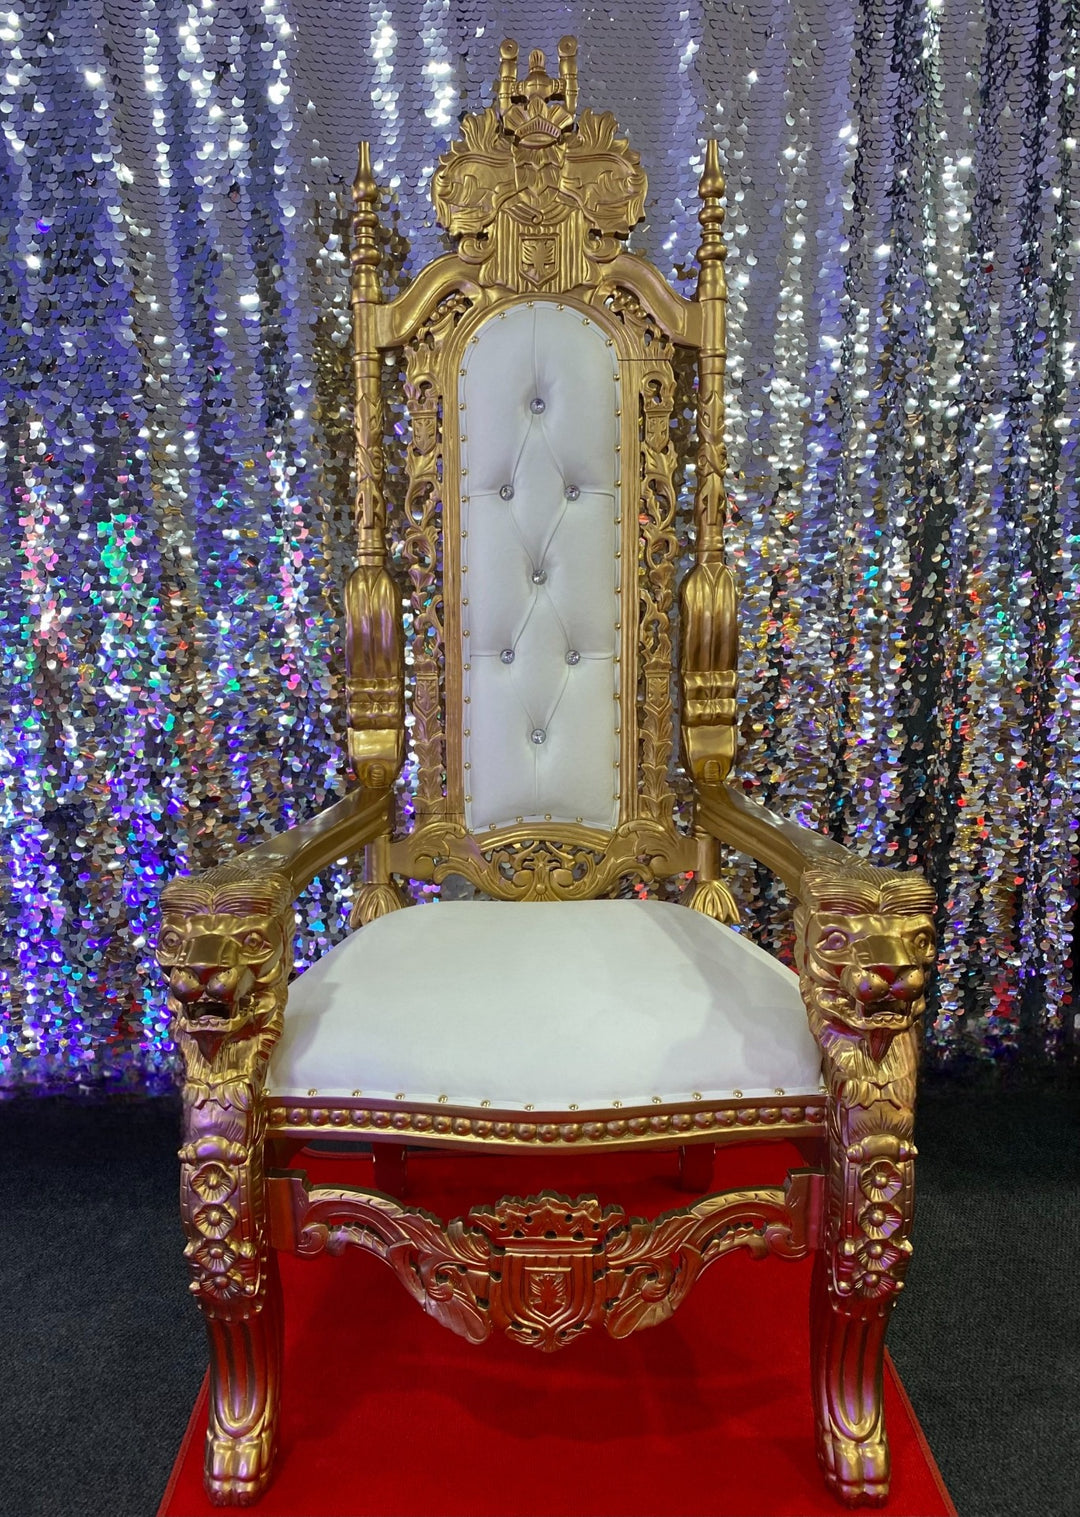 Tiger King Throne Chair Gold/White